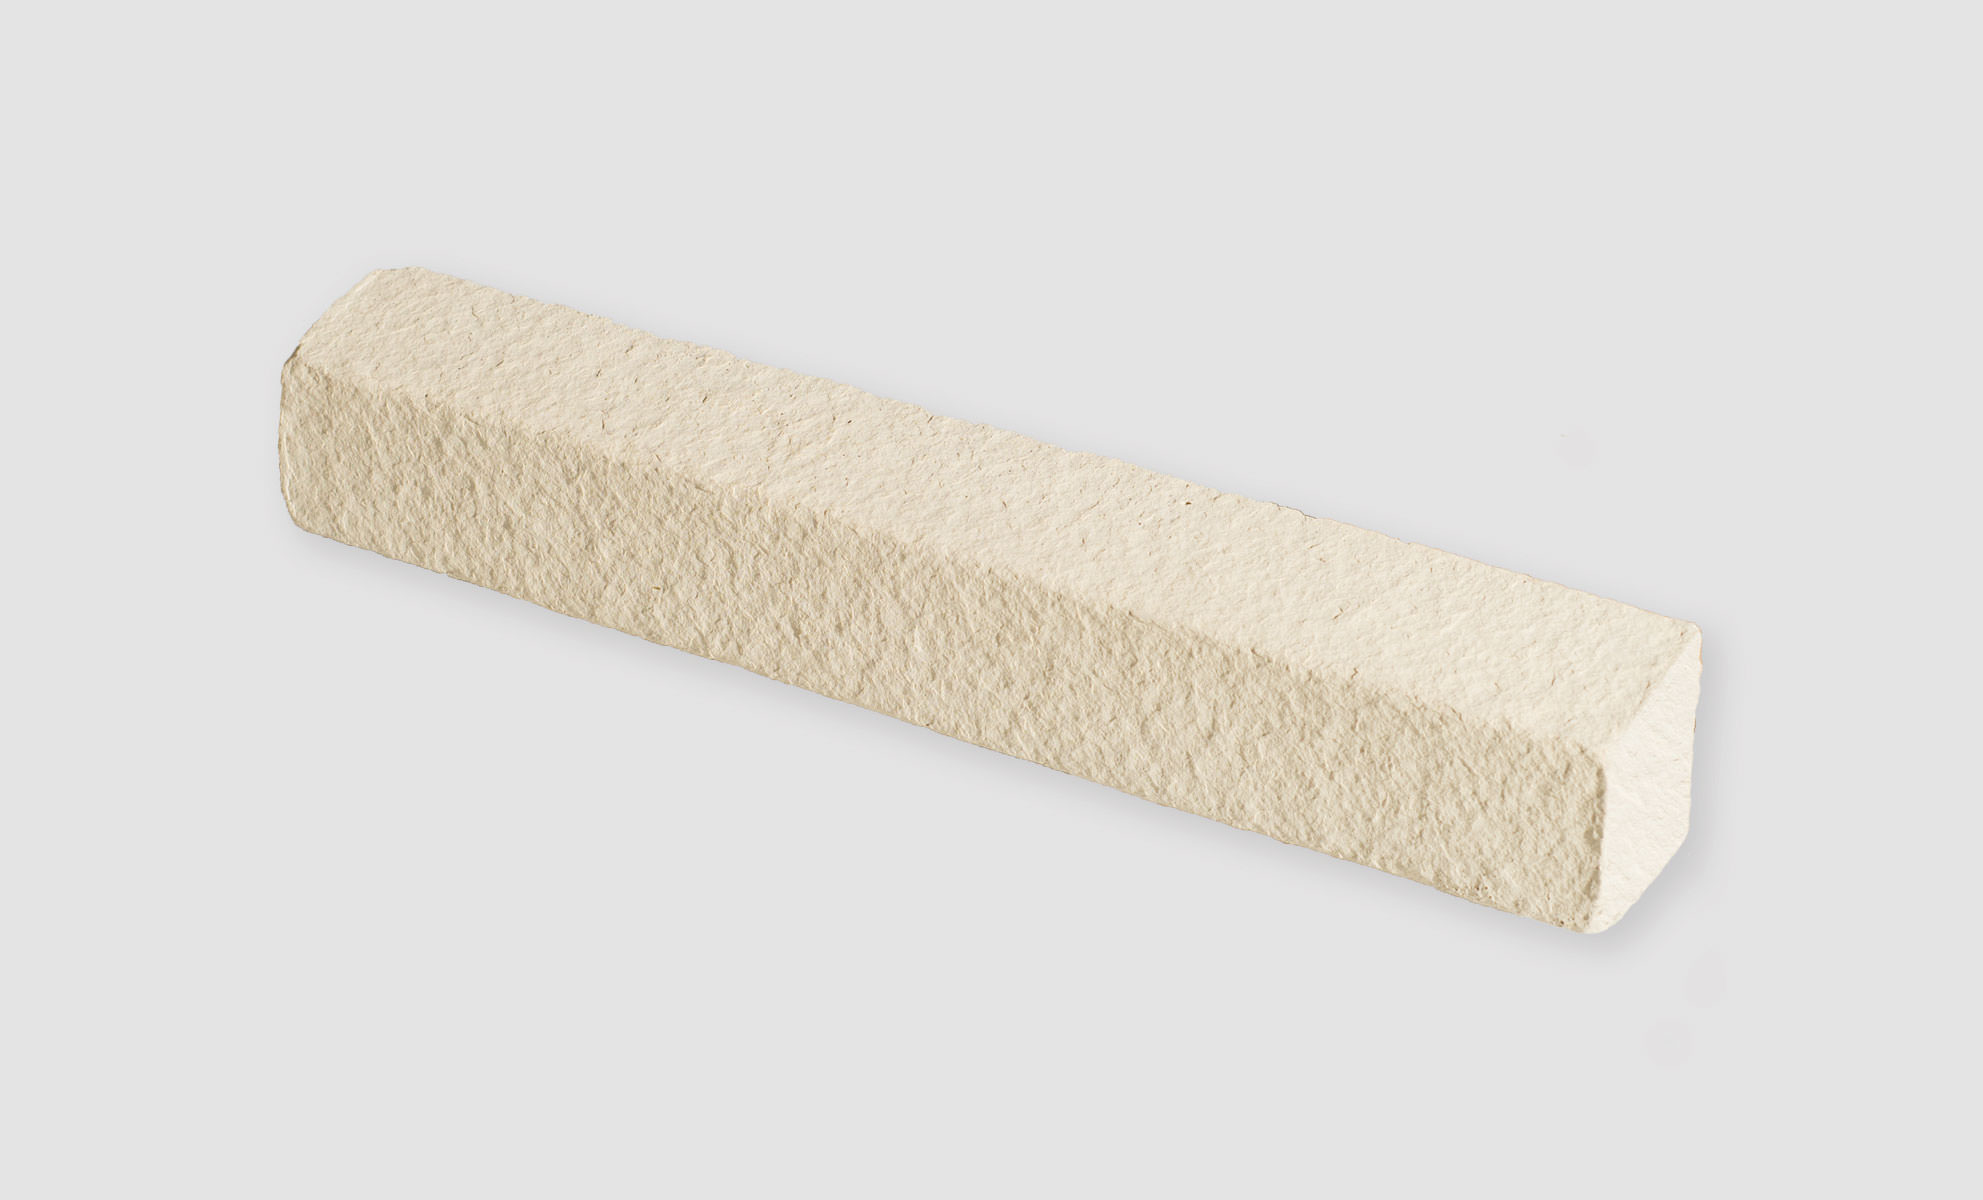 Creative Mines Architectural Trim - Wainscot Cap / Sill (Flamed)